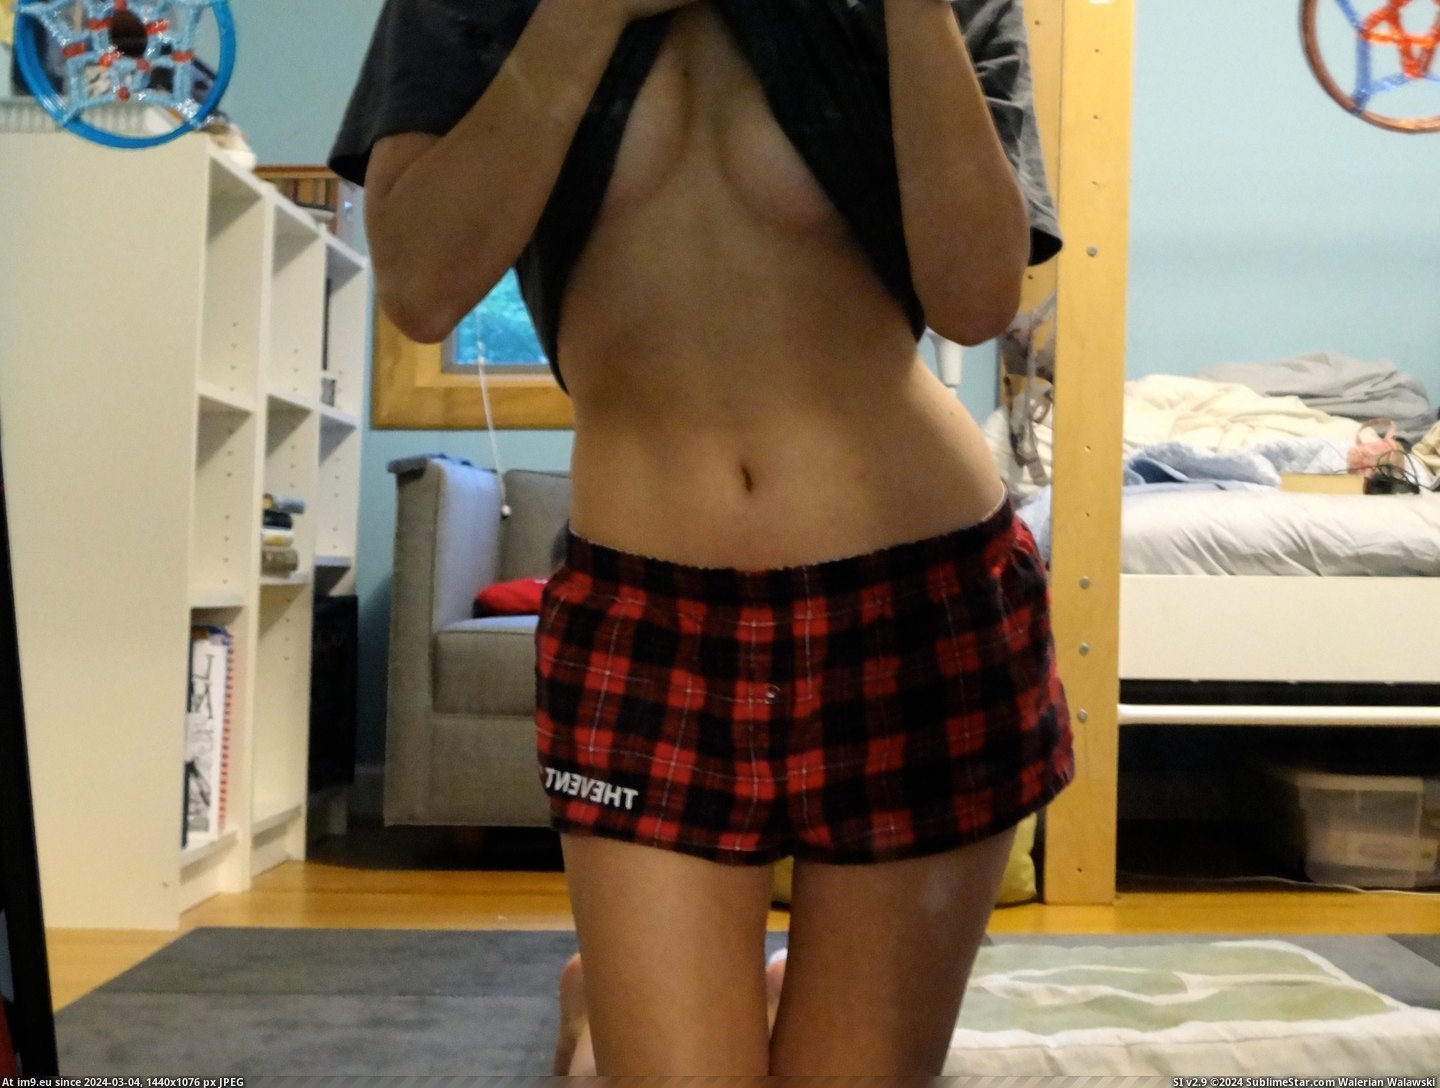 #Show #Favorite #Bite #Obsession #Night #Stay [Gonewild] Why don't you stay for the night, or maybe a bite? I could show you my favorite...obsession. [F] 2 Pic. (Image of album My r/GONEWILD favs))